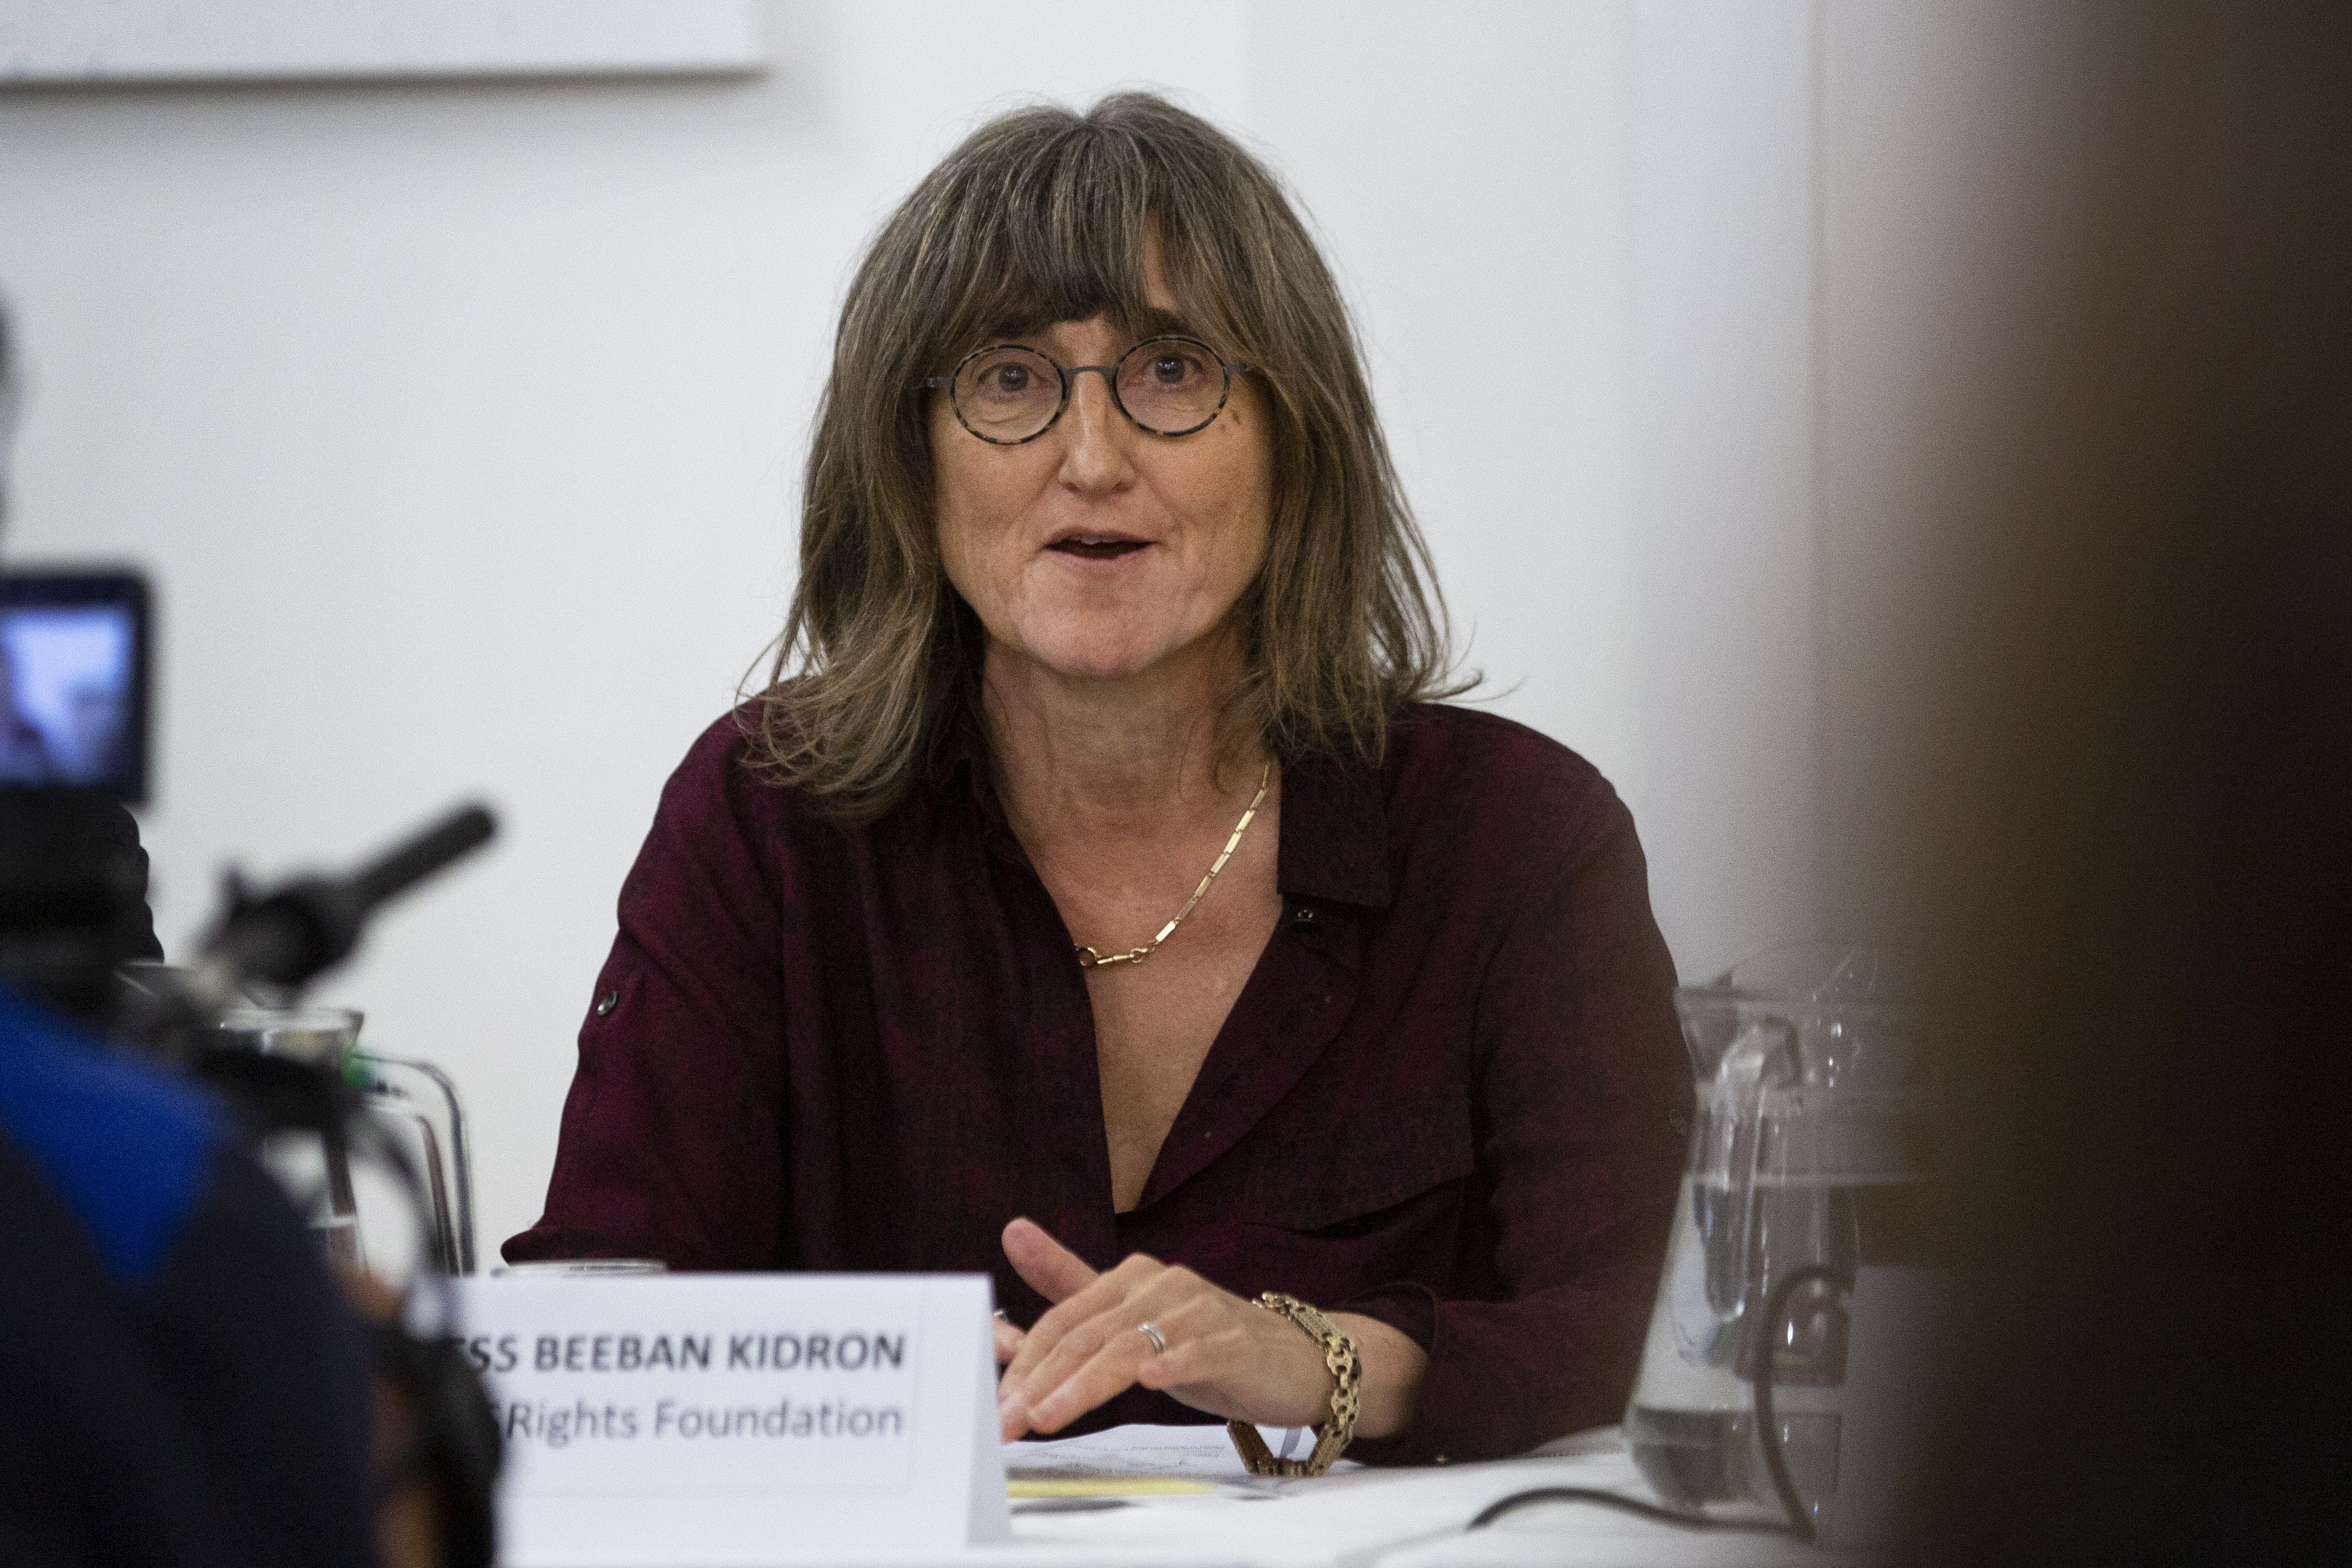 Baroness Beeban Kidron during a press conference in Barnet, north London, after the inquest into the death of schoolgirl Molly Russell (Joshua Bratt/PA)